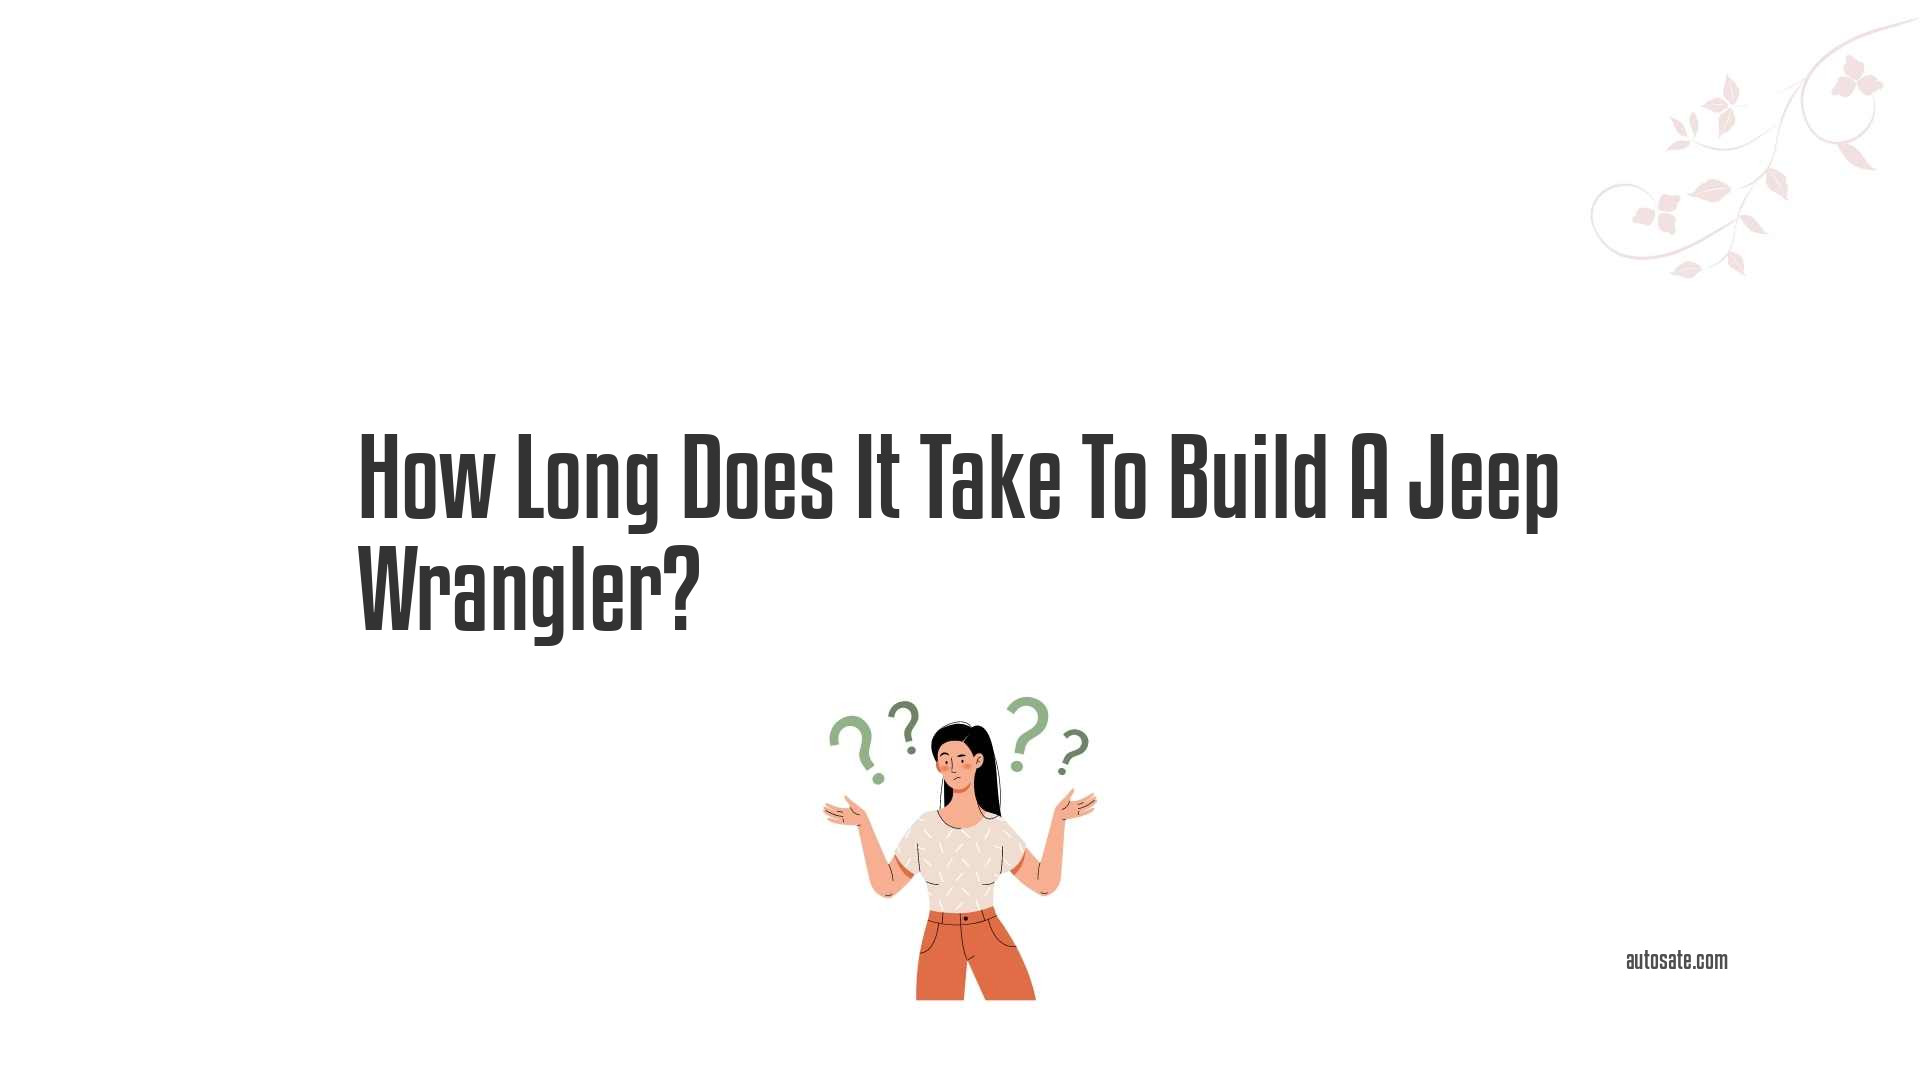 How Long Does It Take To Build A Jeep Wrangler?